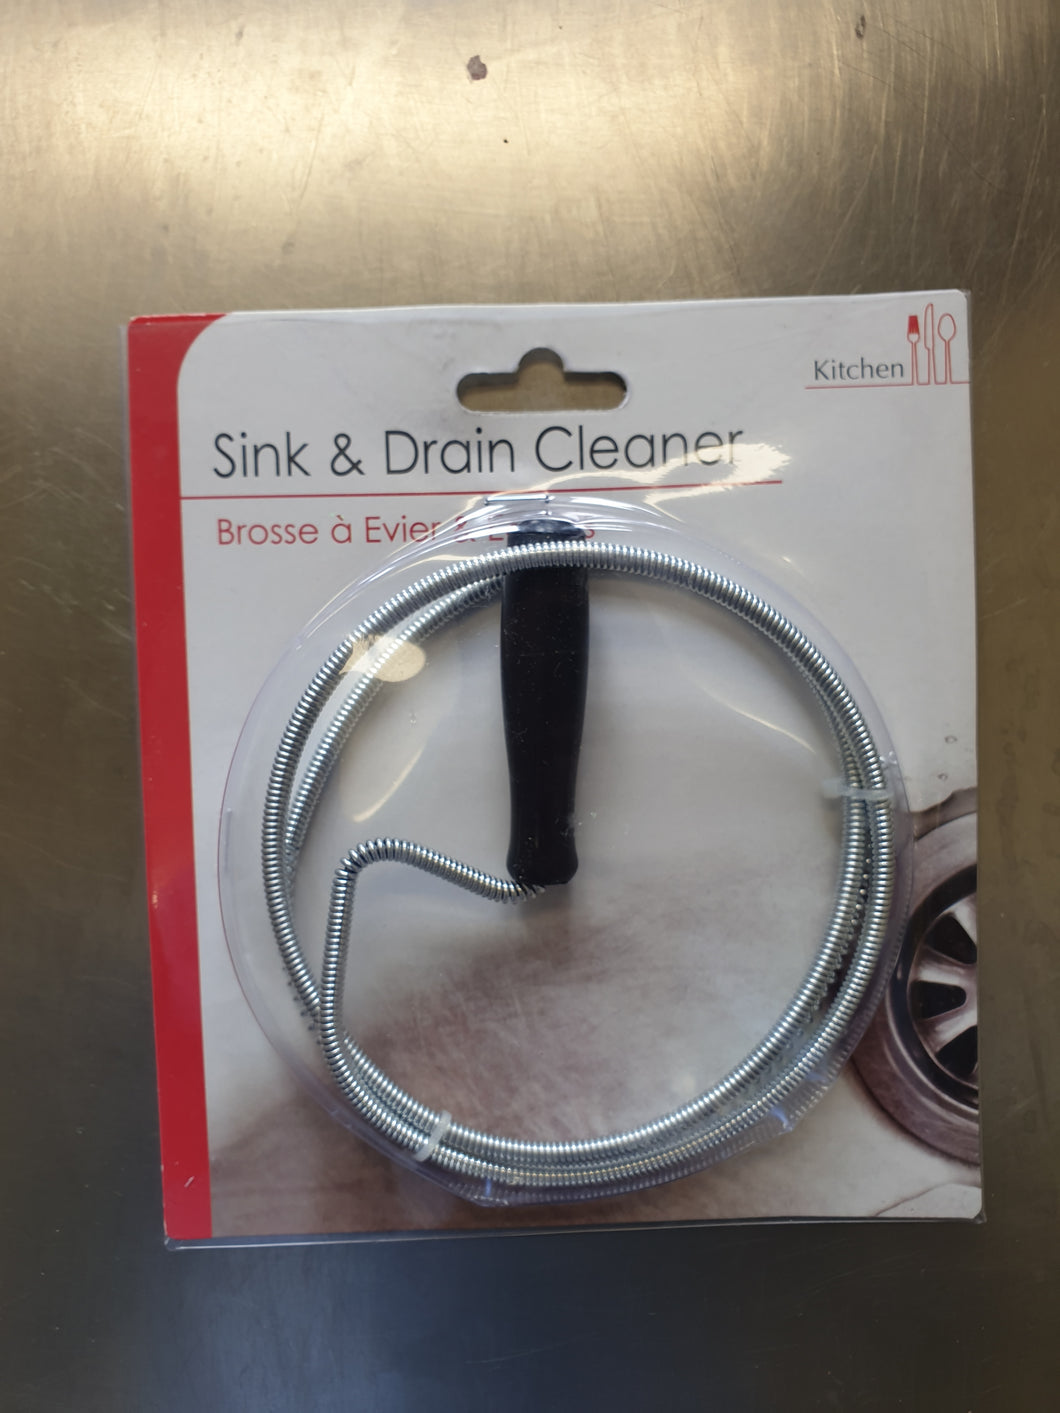 Sink and Drain Cleaner